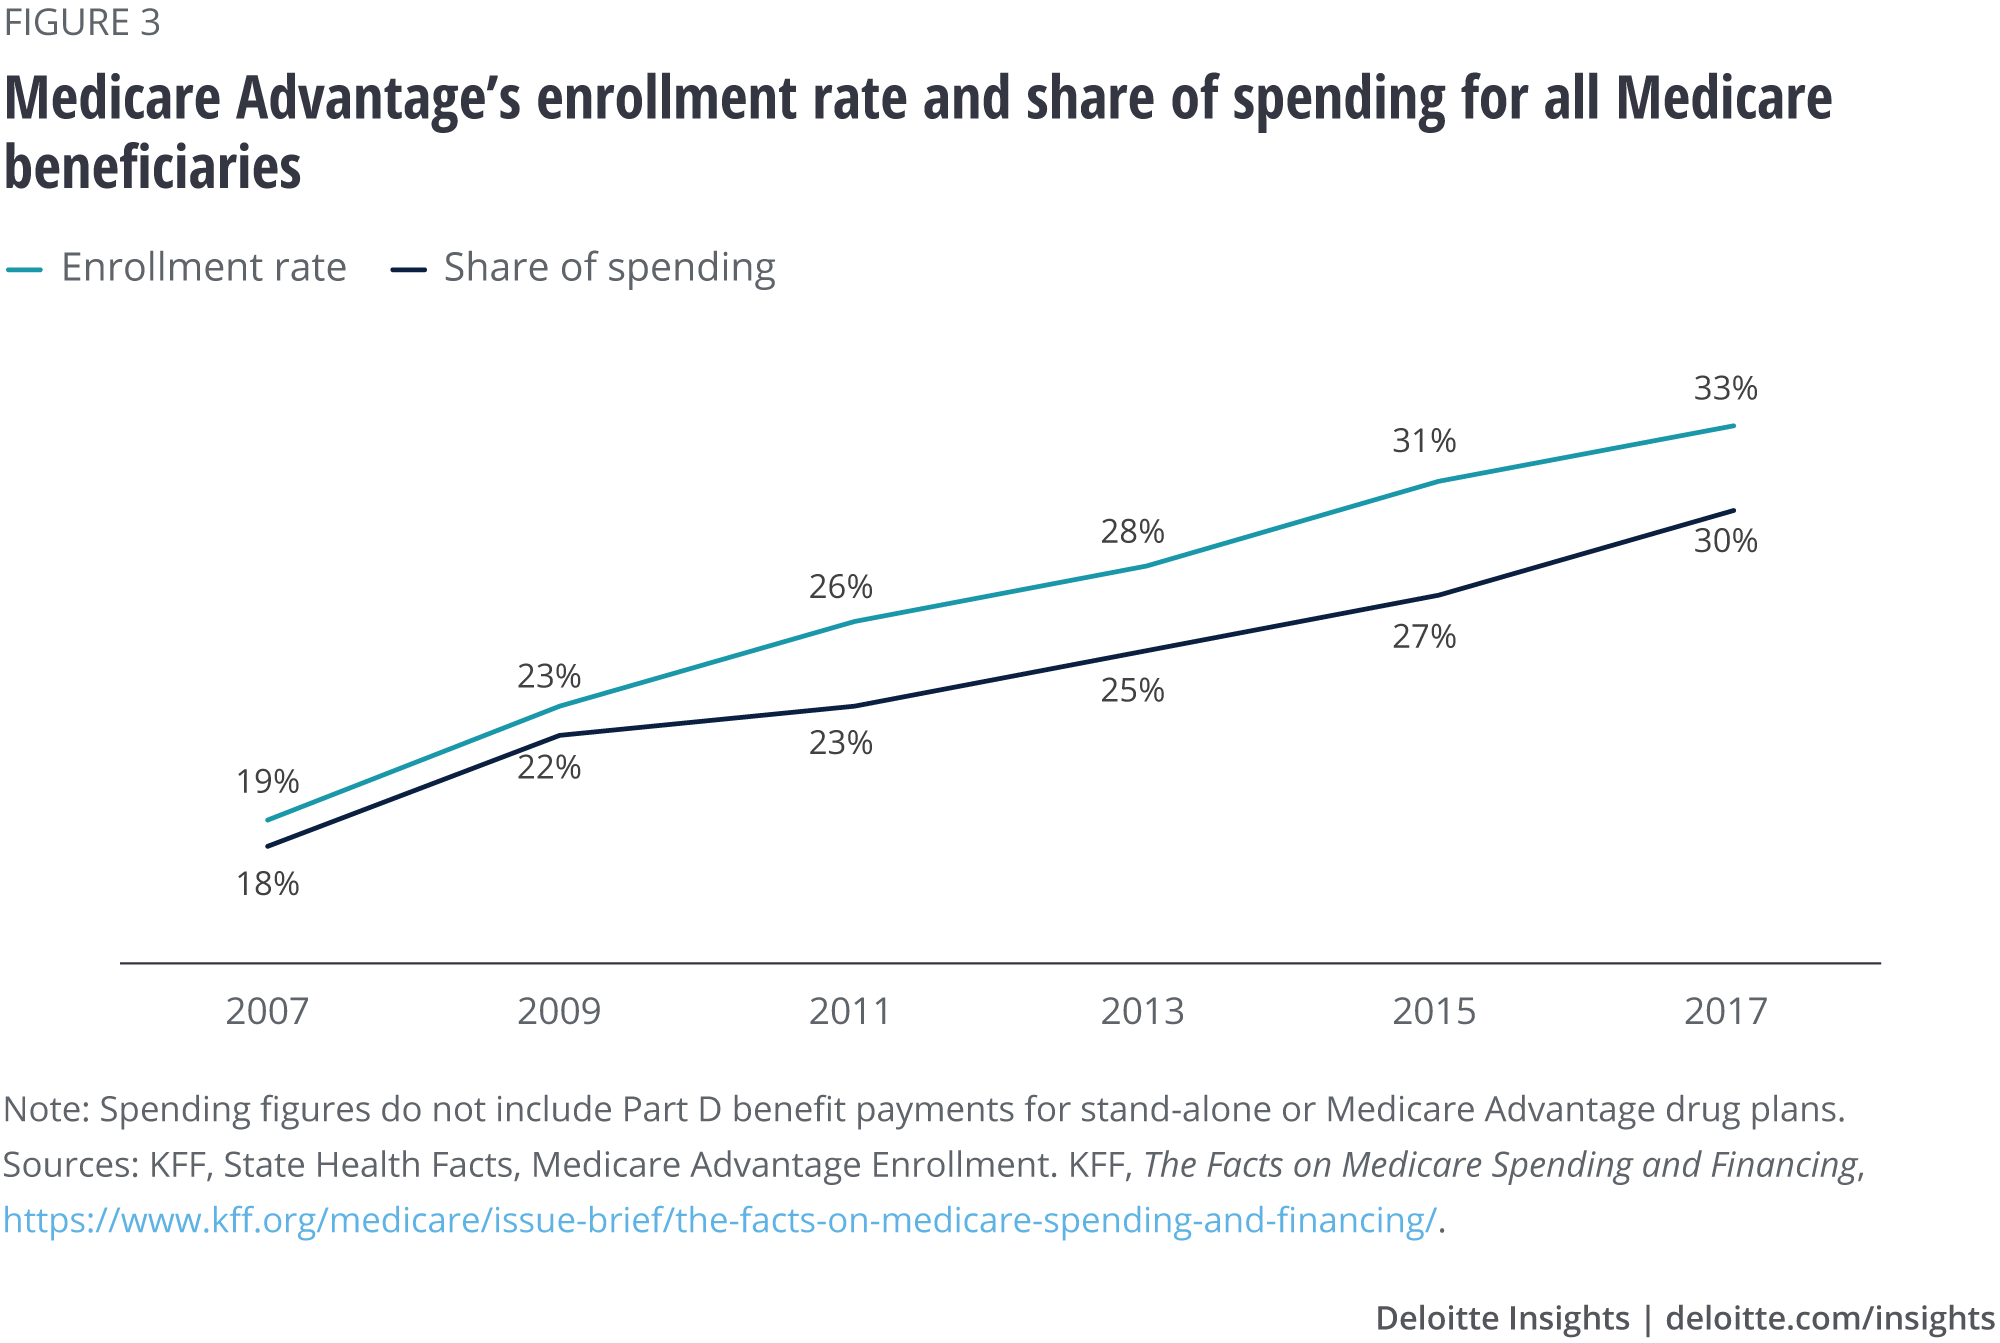 Medicare Advantage’s enrollment rate and share of spending for all Medicare beneficiaries